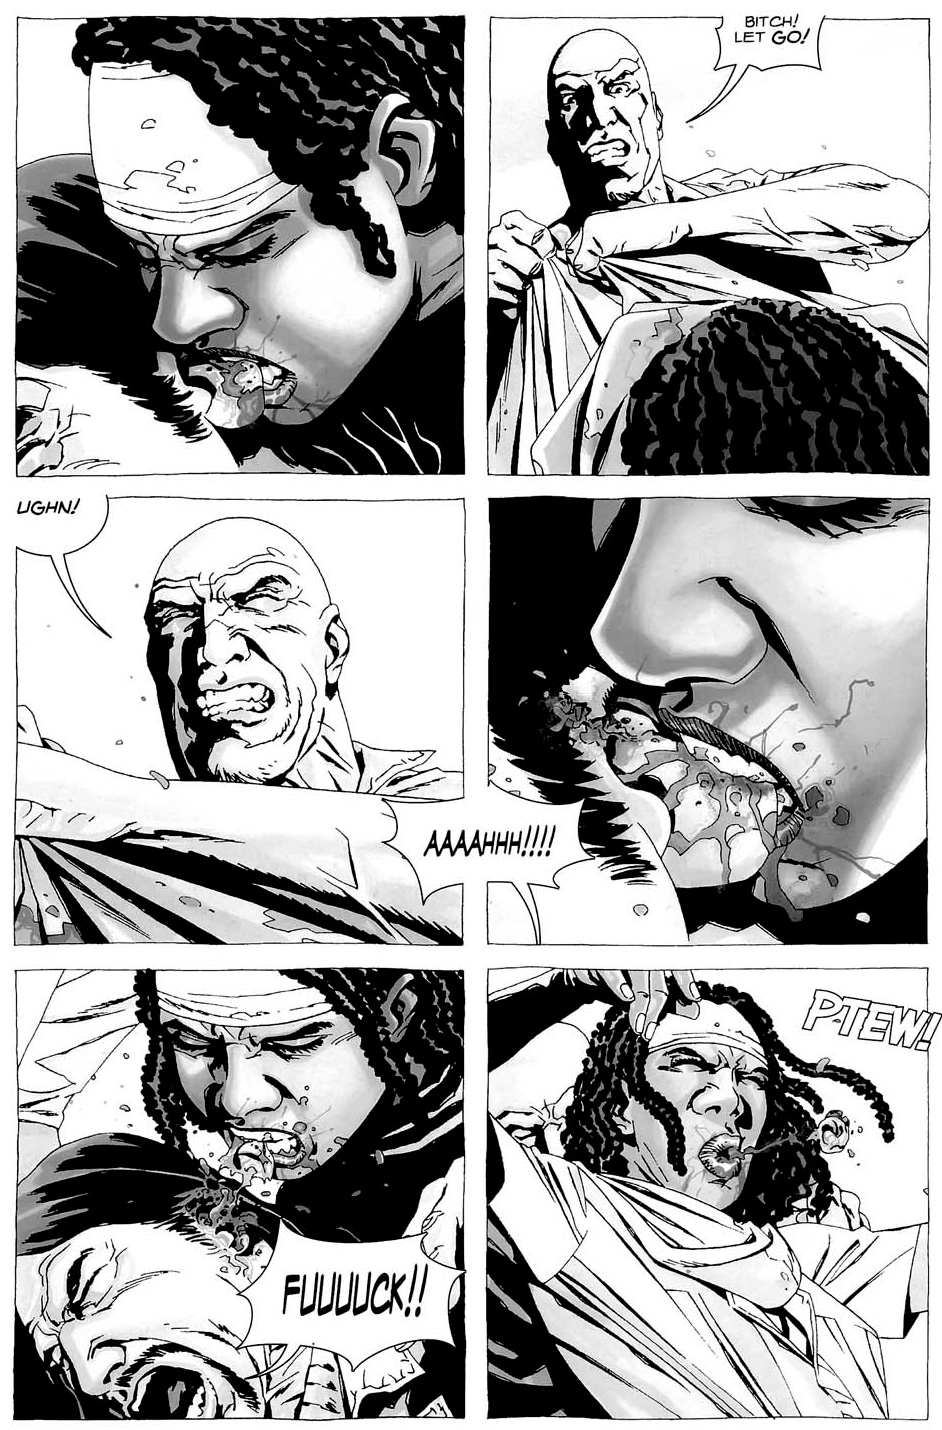 michonne bite the governor's ear off 